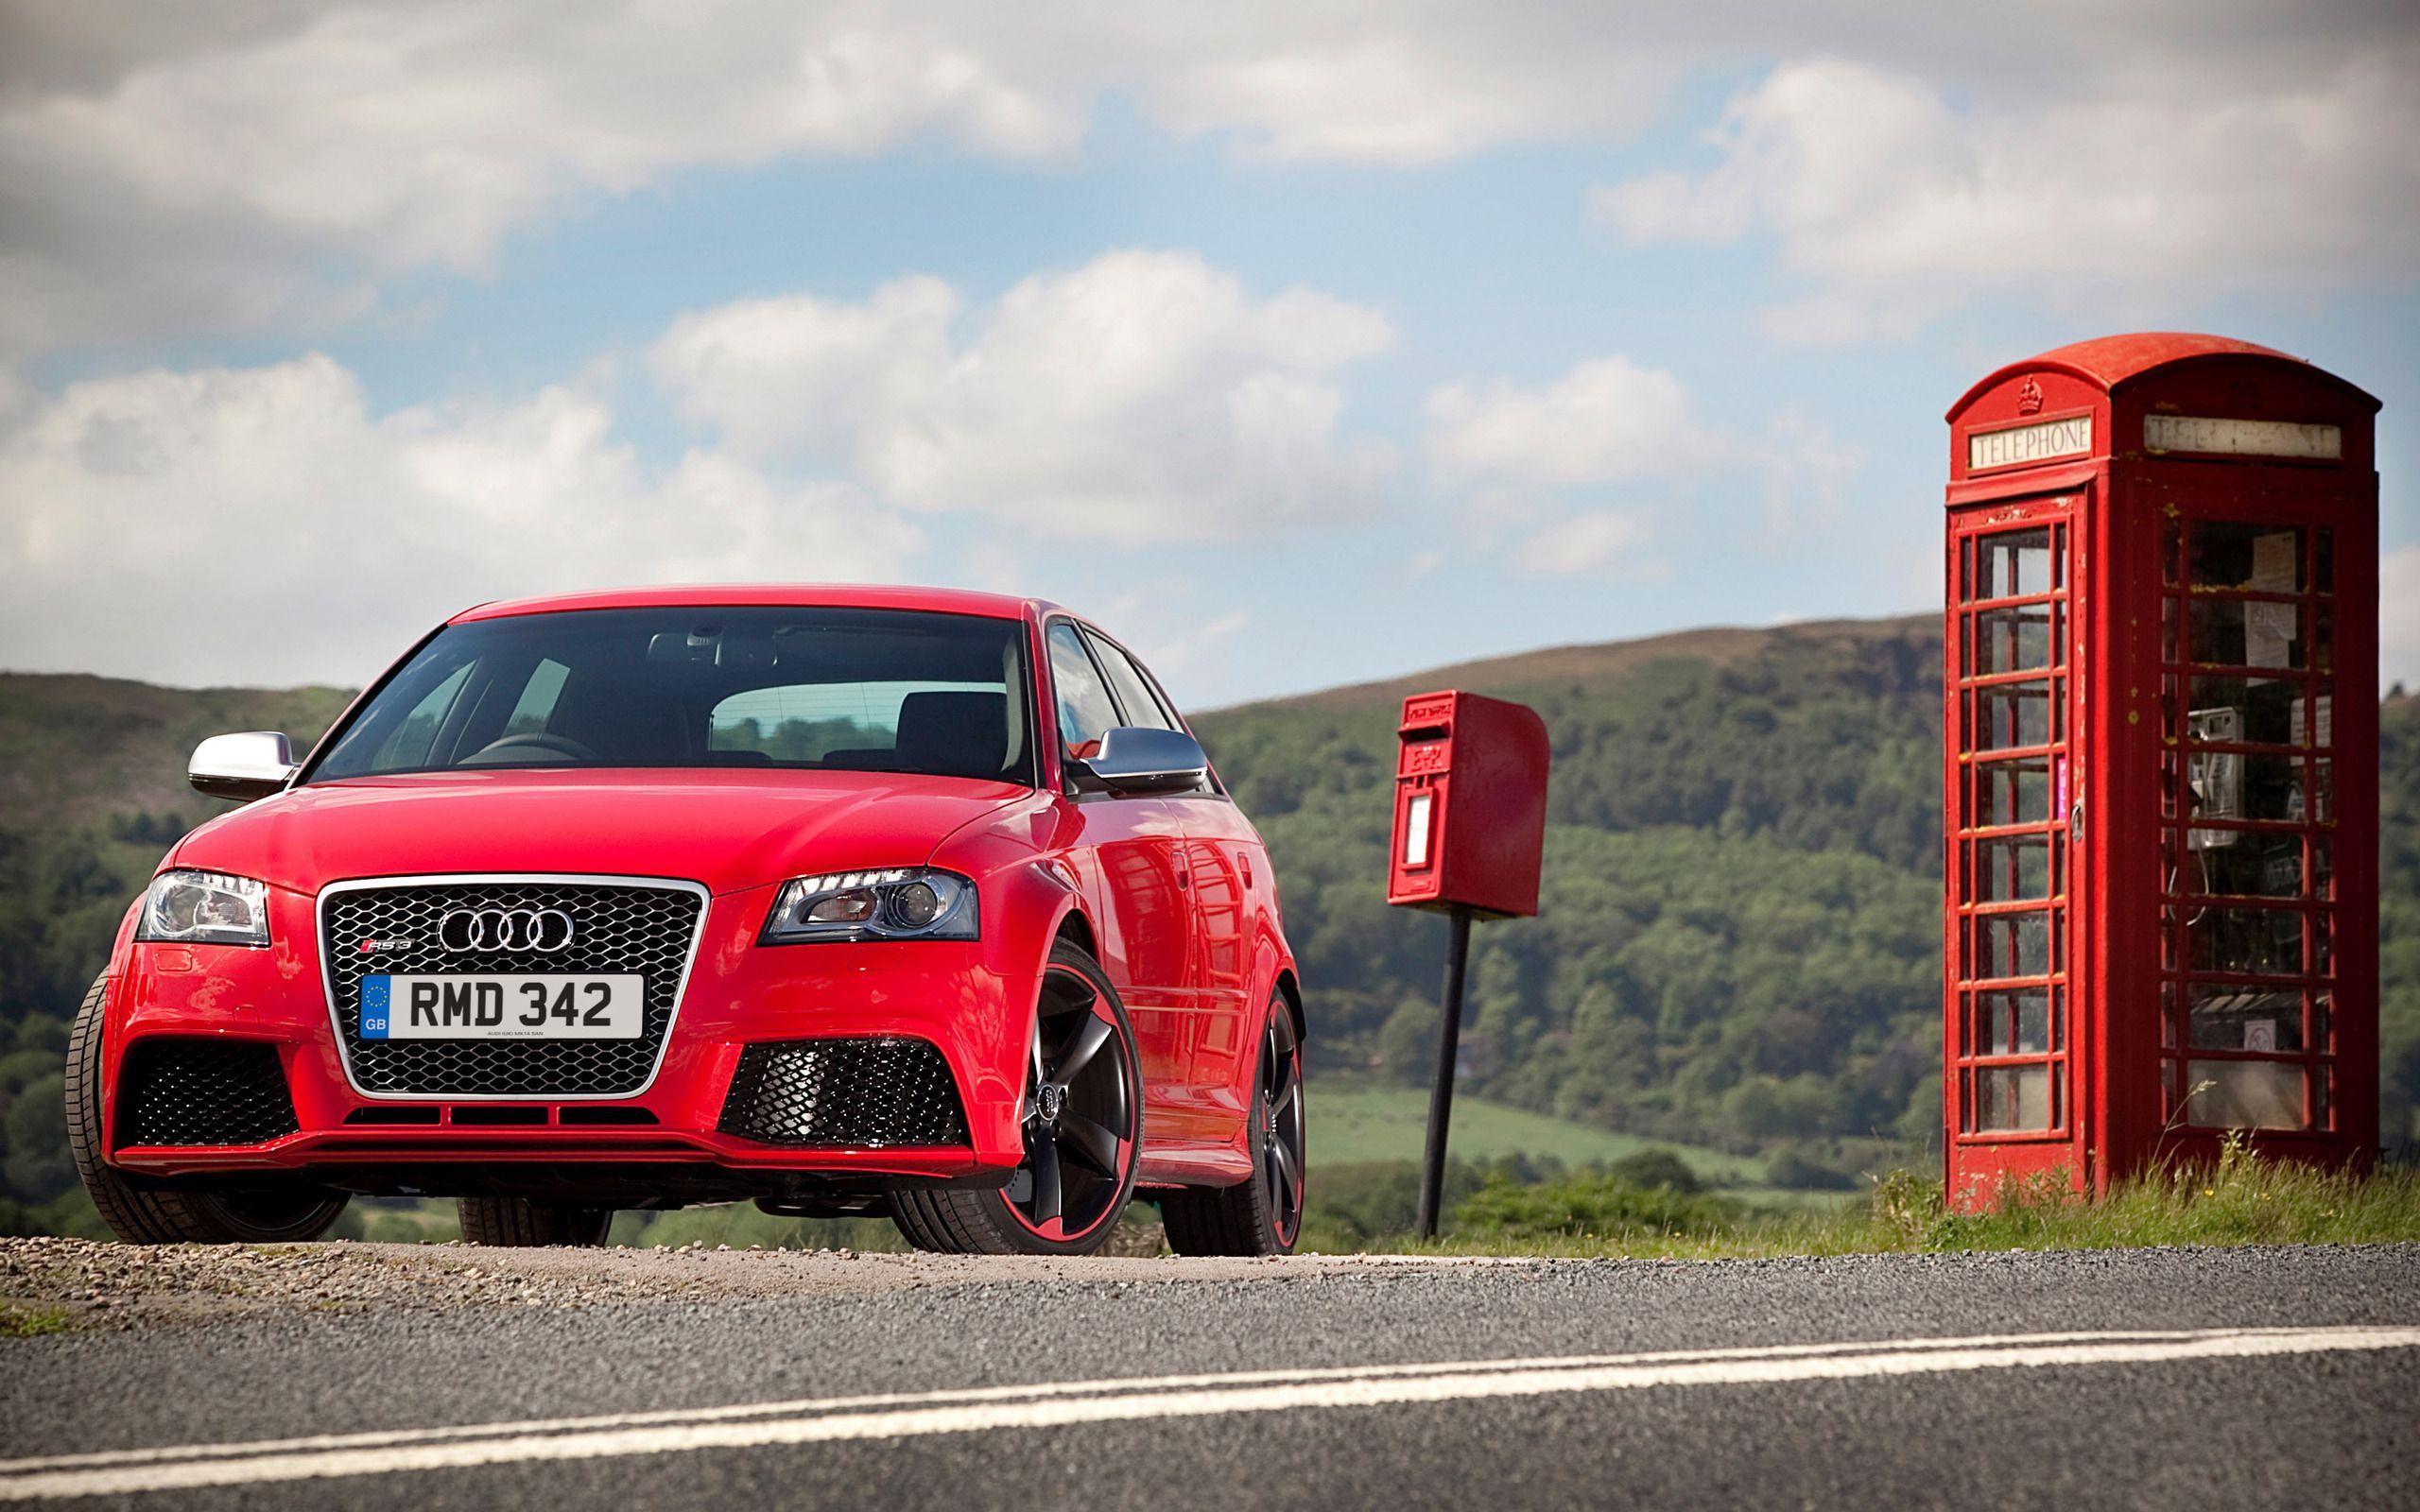 Audi RS3 Sportback wallpaper and image, picture, photo